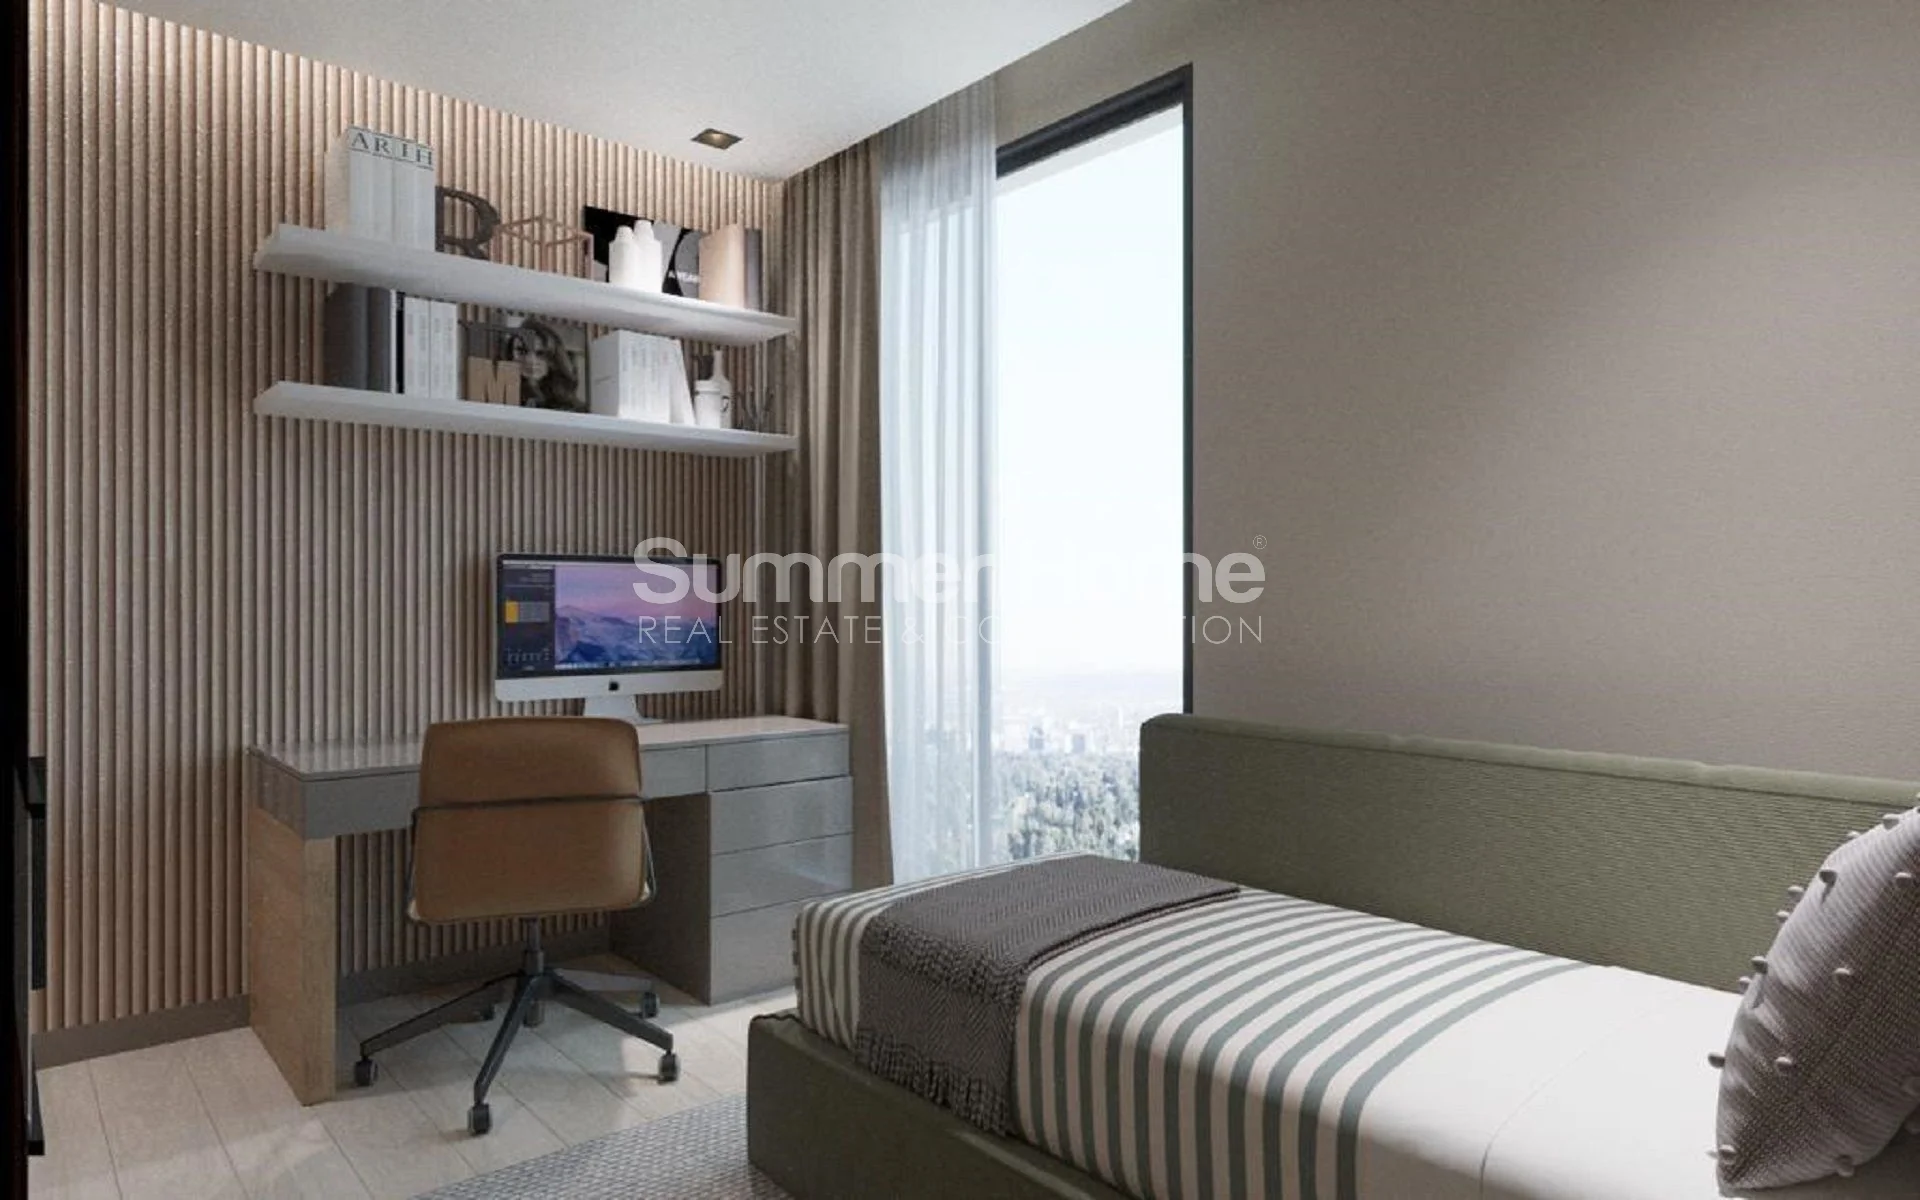 Beautiful Apartments in well sought-after area Muratpasa Interior - 1